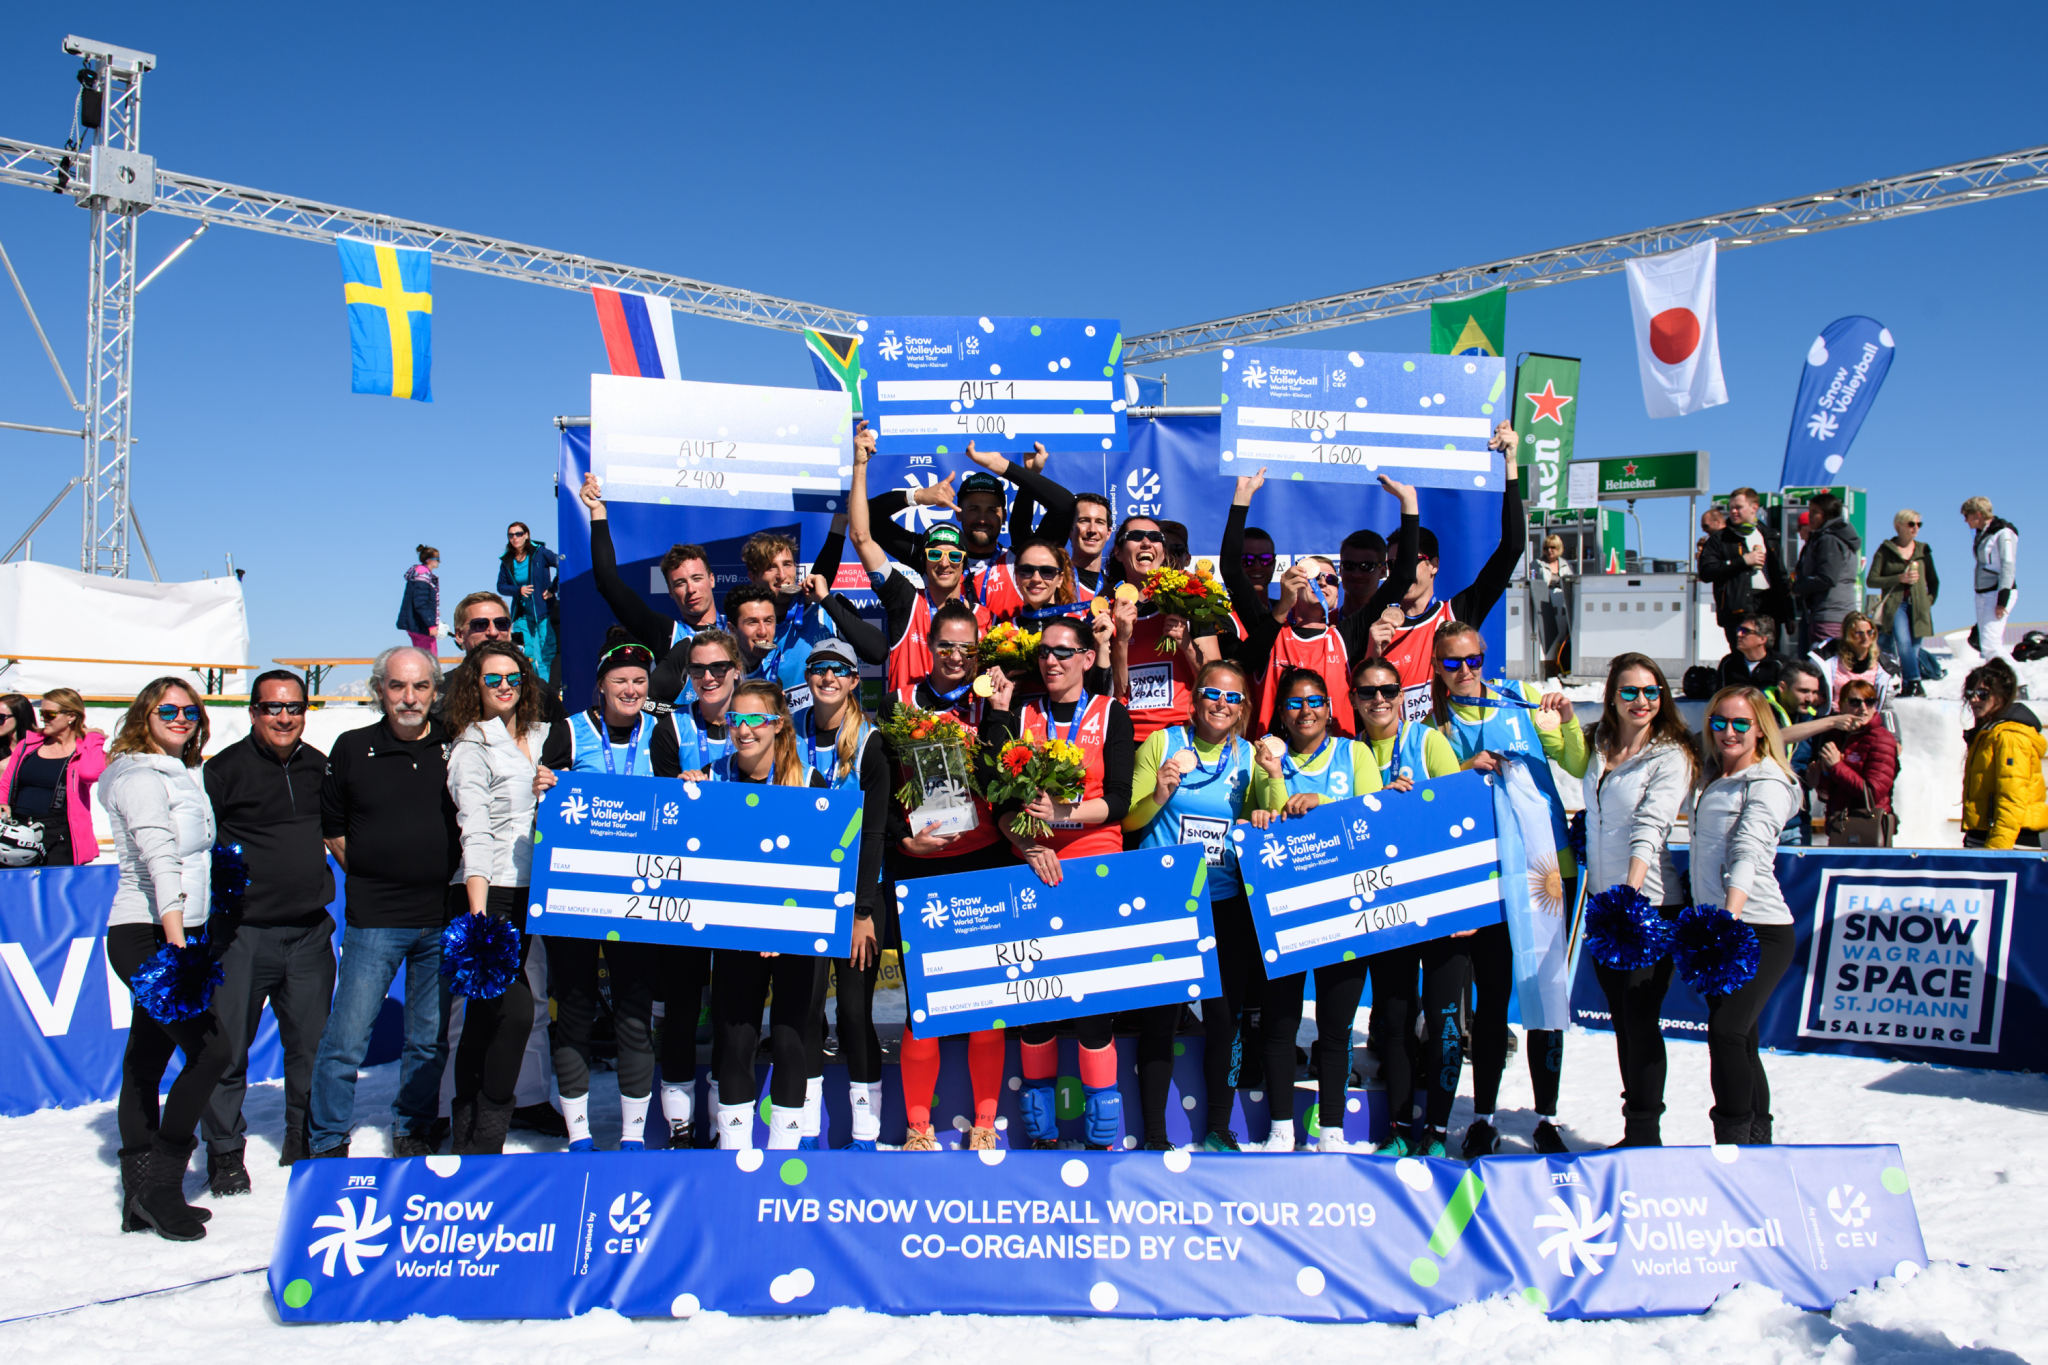 Kronplatz to stage second event of FIVB Snow Volleyball World Tour